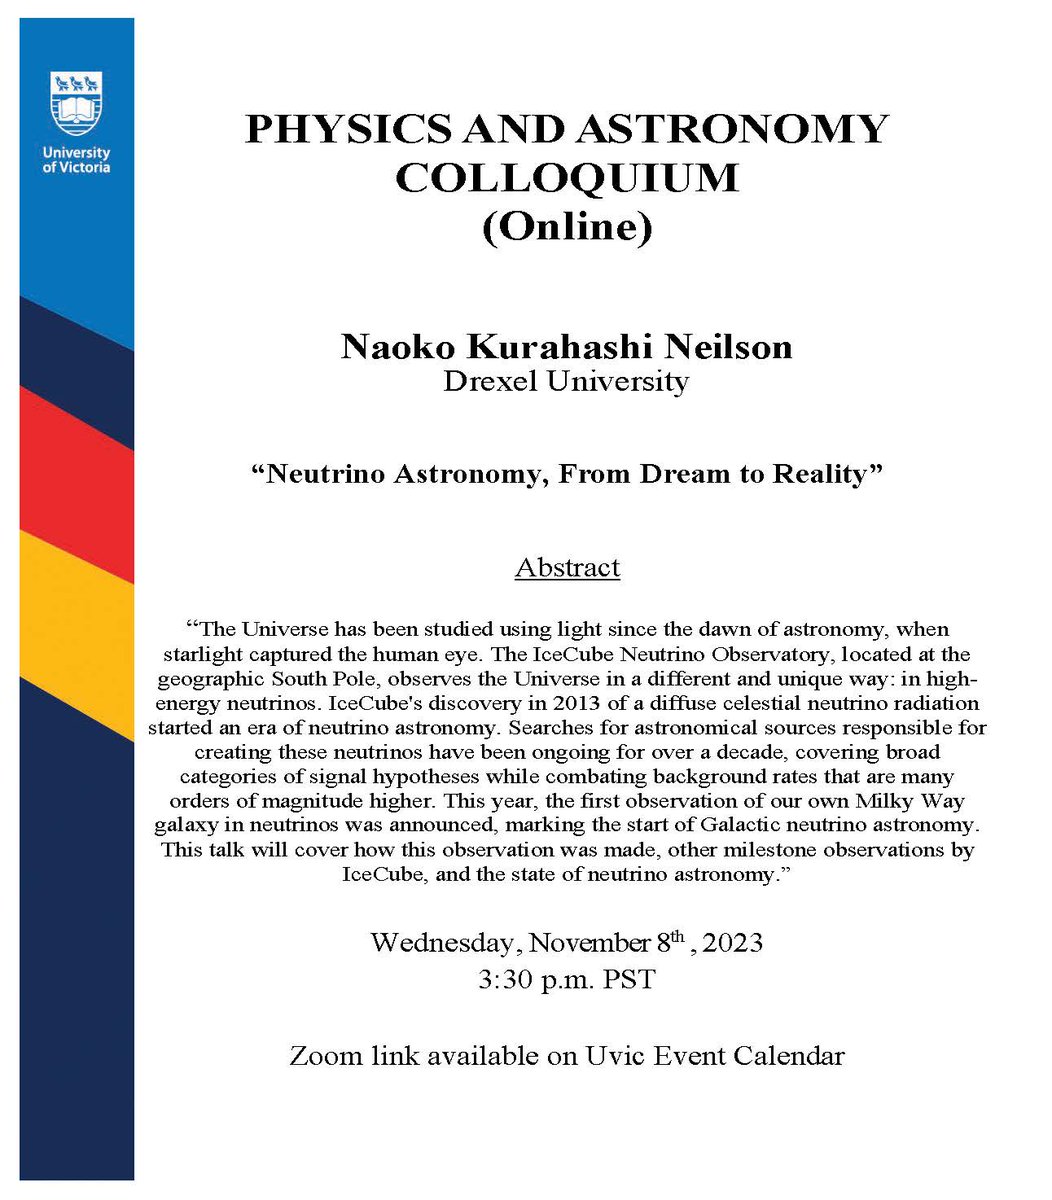 COLLOQUIUM (Online): Dr. Naoko Kurahashi-Neilson, Drexel University, will give an online colloquium on Wednesday November 8th at 3:30pm PST. For more information: events.uvic.ca/physics/event/…